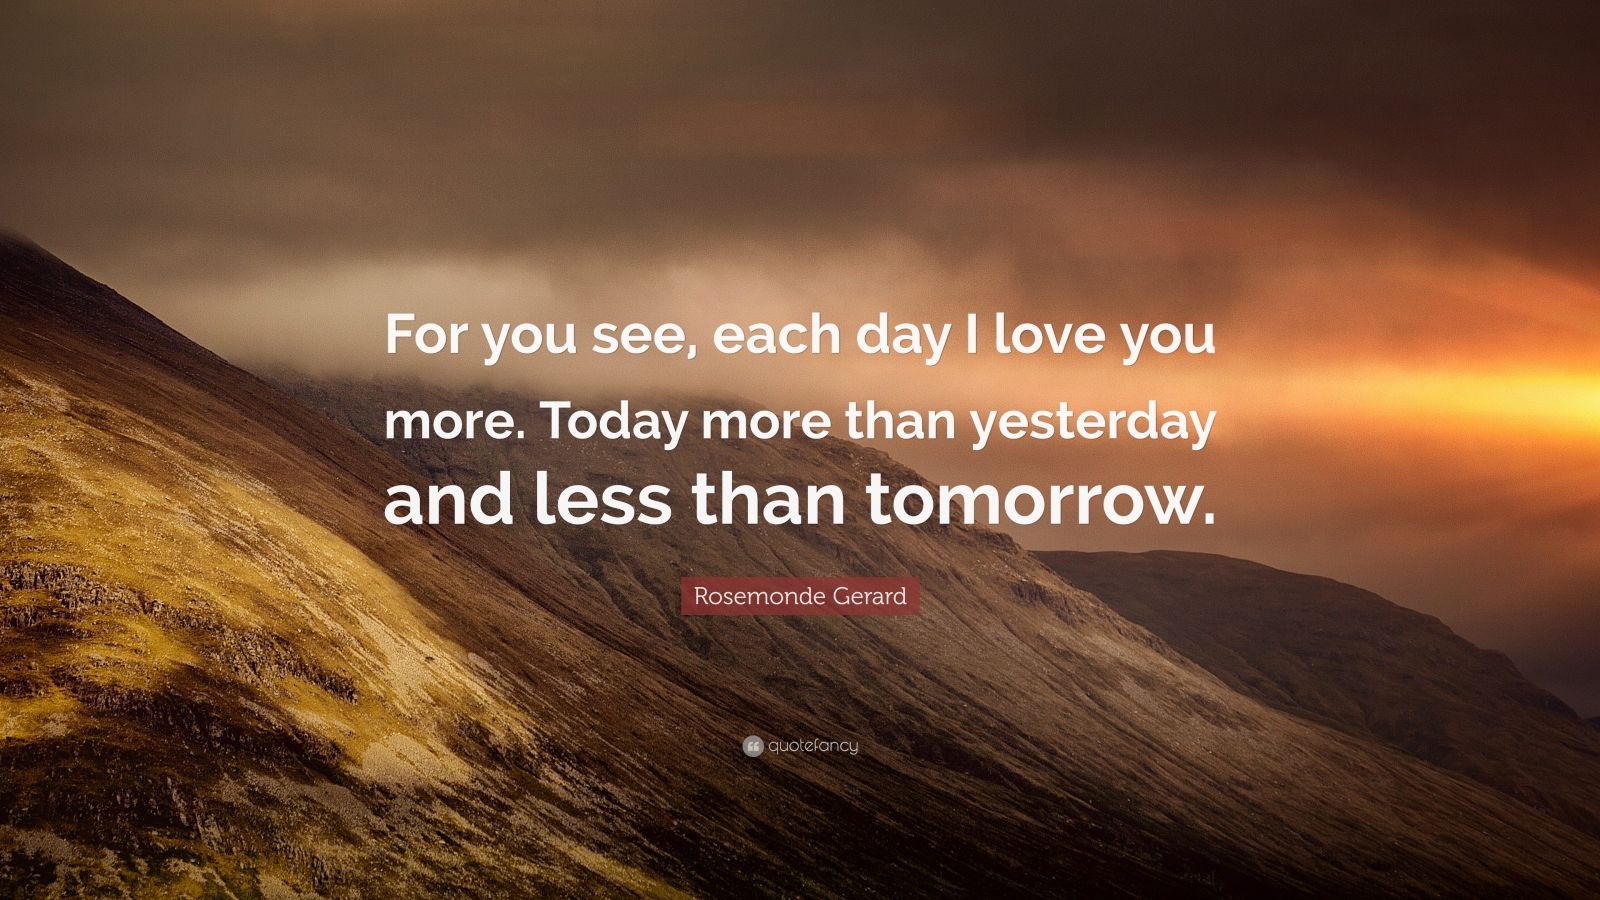 Rosemonde Gerard Quote “for You See Each Day I Love You More Today More Than Yesterday And 5839